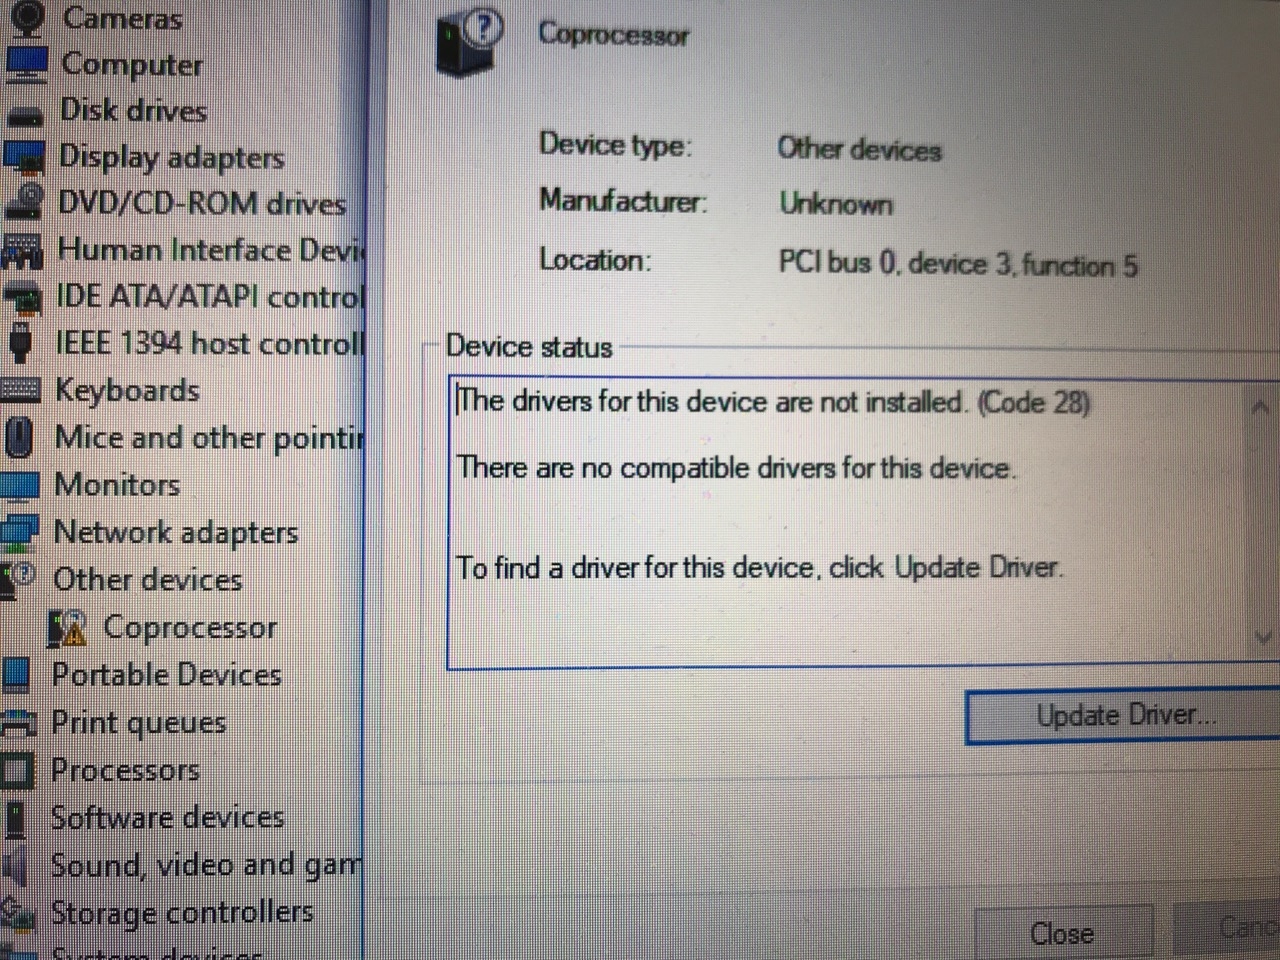 bootcamp driver for coprocessor missing